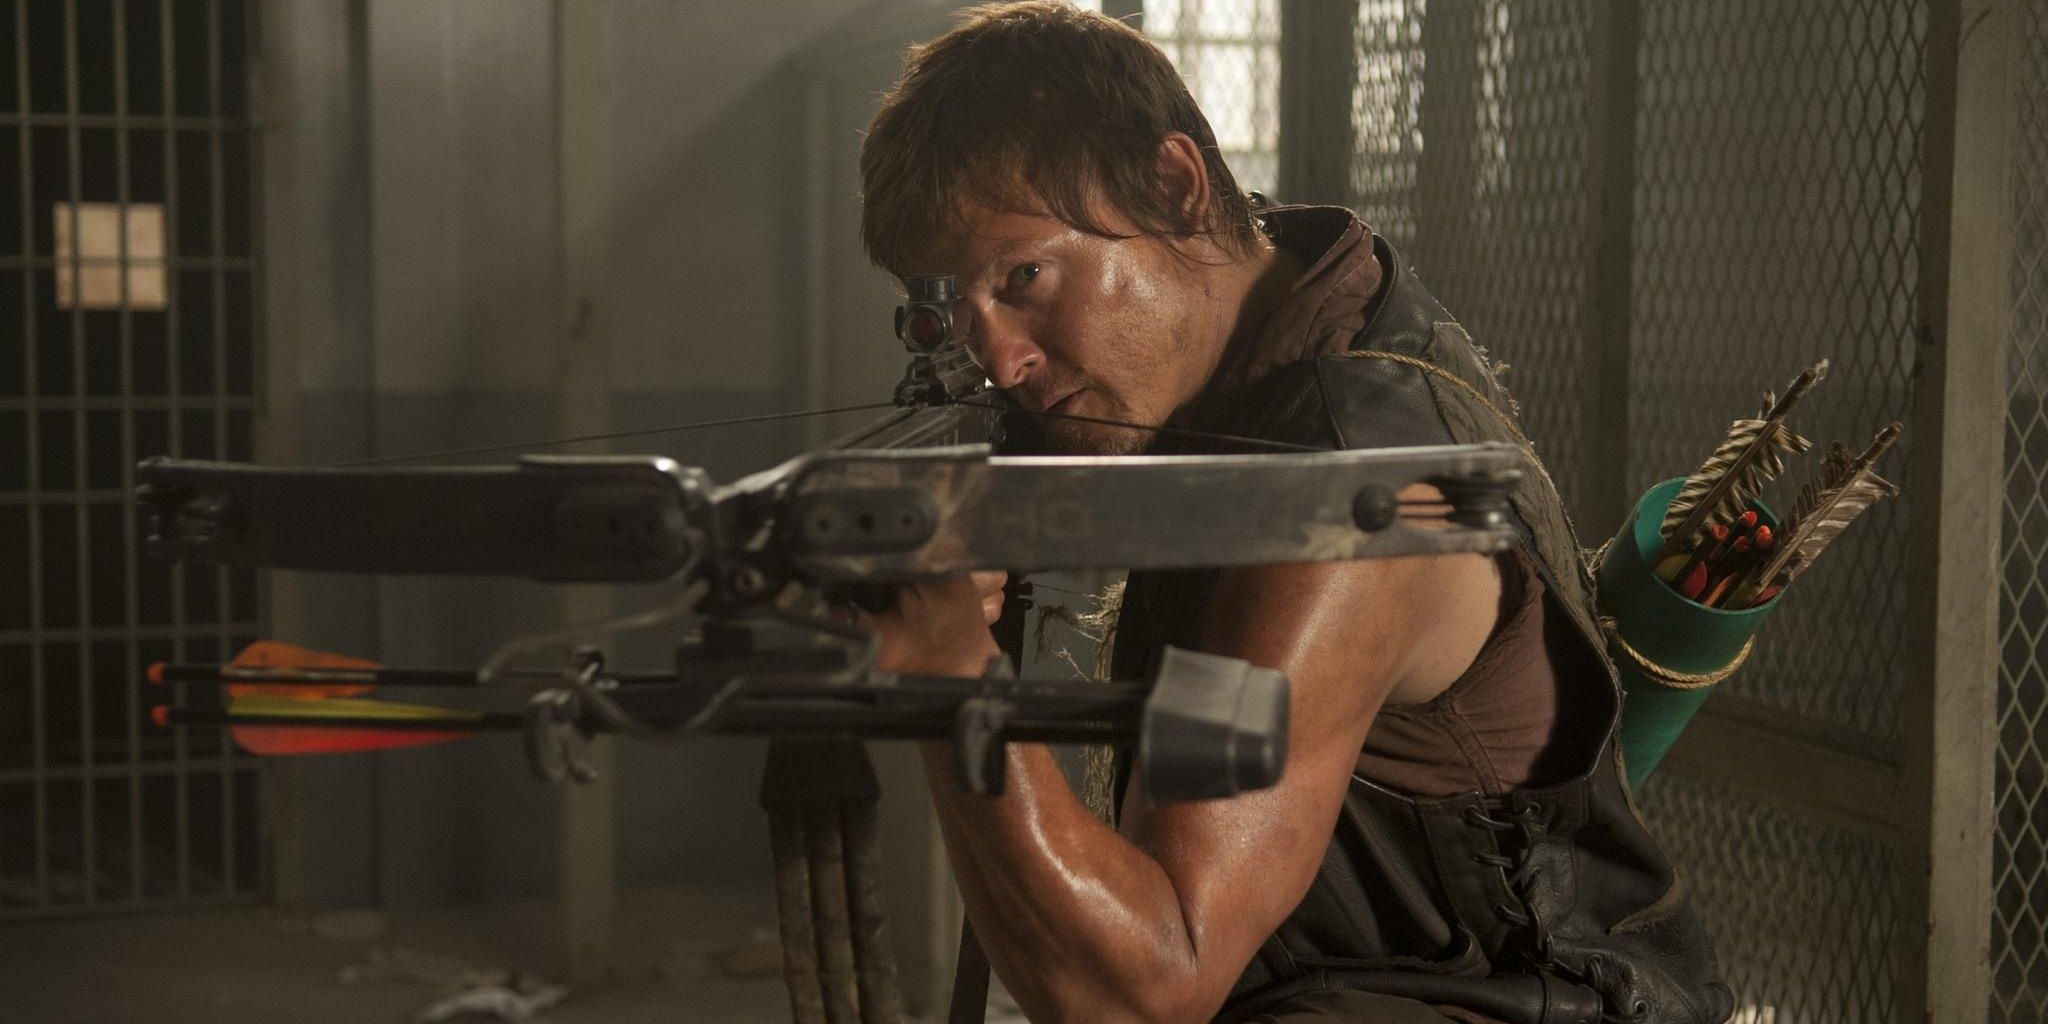 Zombie apocalypse survivor Daryl Dixon aims down the sights of his crossbow in 'The Walking Dead'.